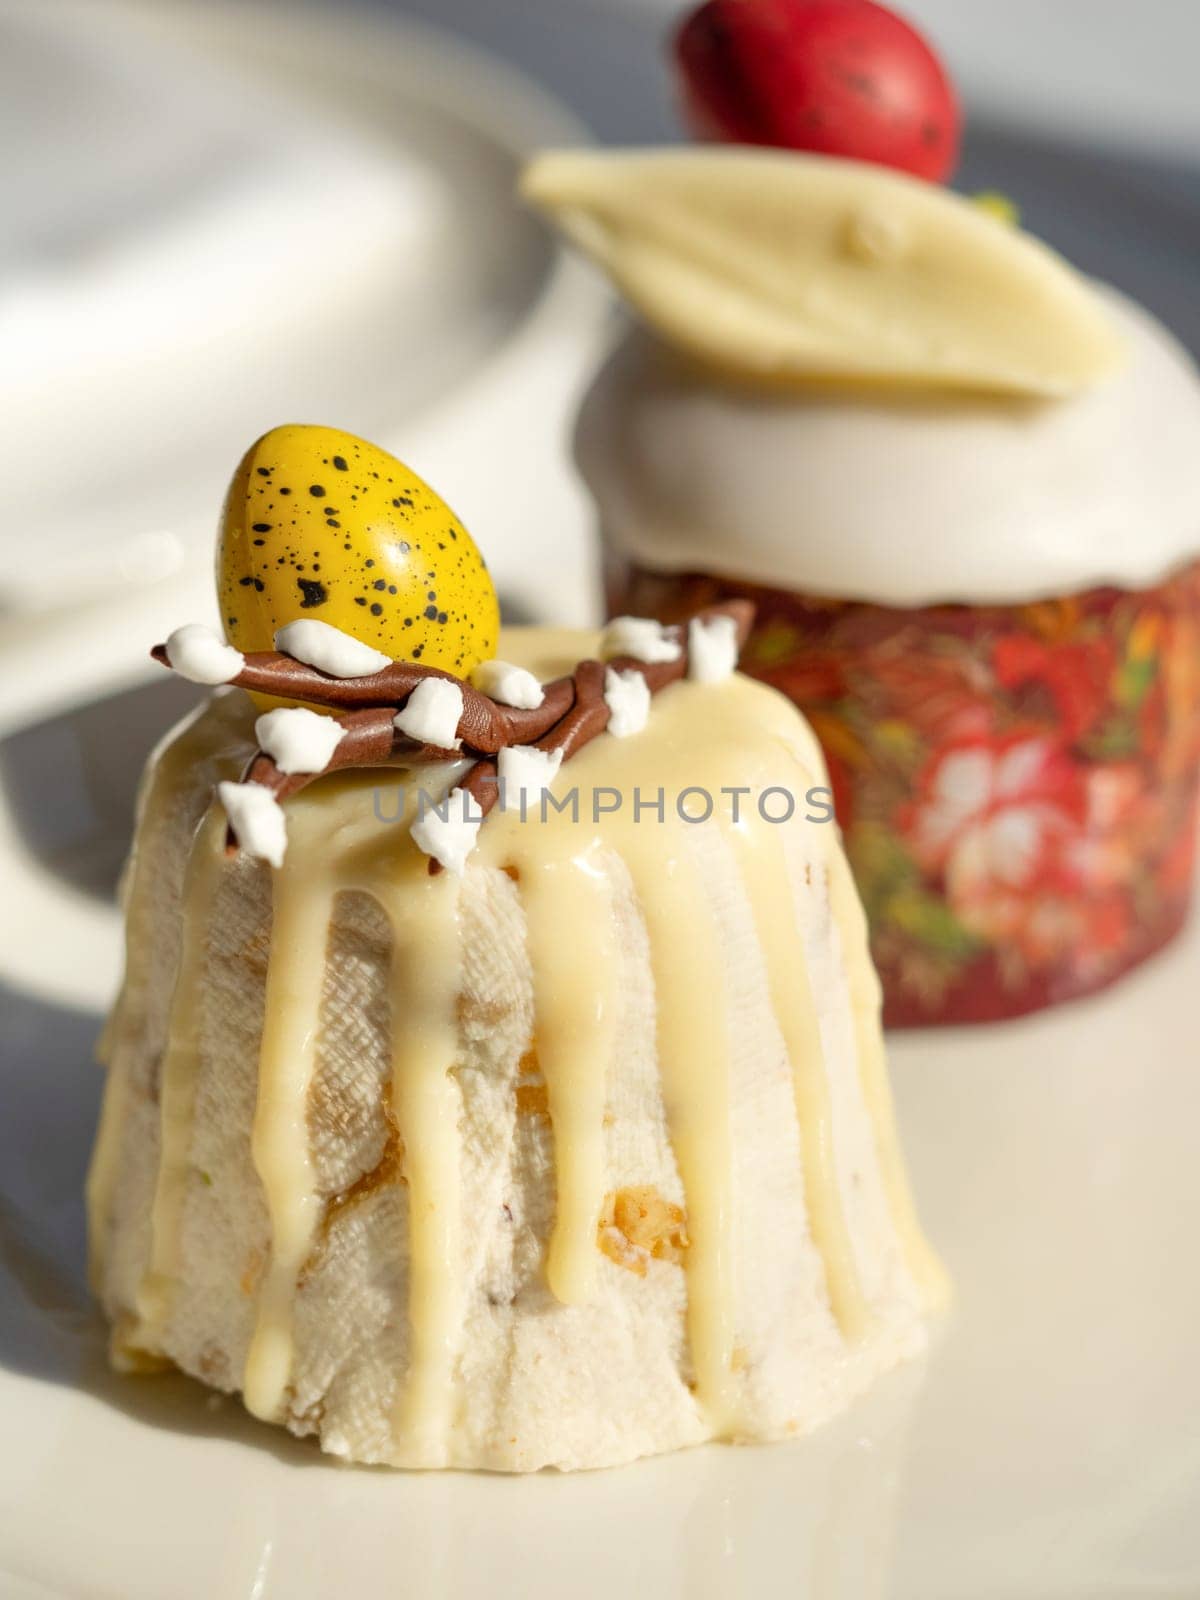 Traditional Easter cottage cheese dessert Paskha decorated with quail eggs and chocolate willow on tabletop background. Modern Orthodox Easter background with two mini cottage curd desserts Paskha